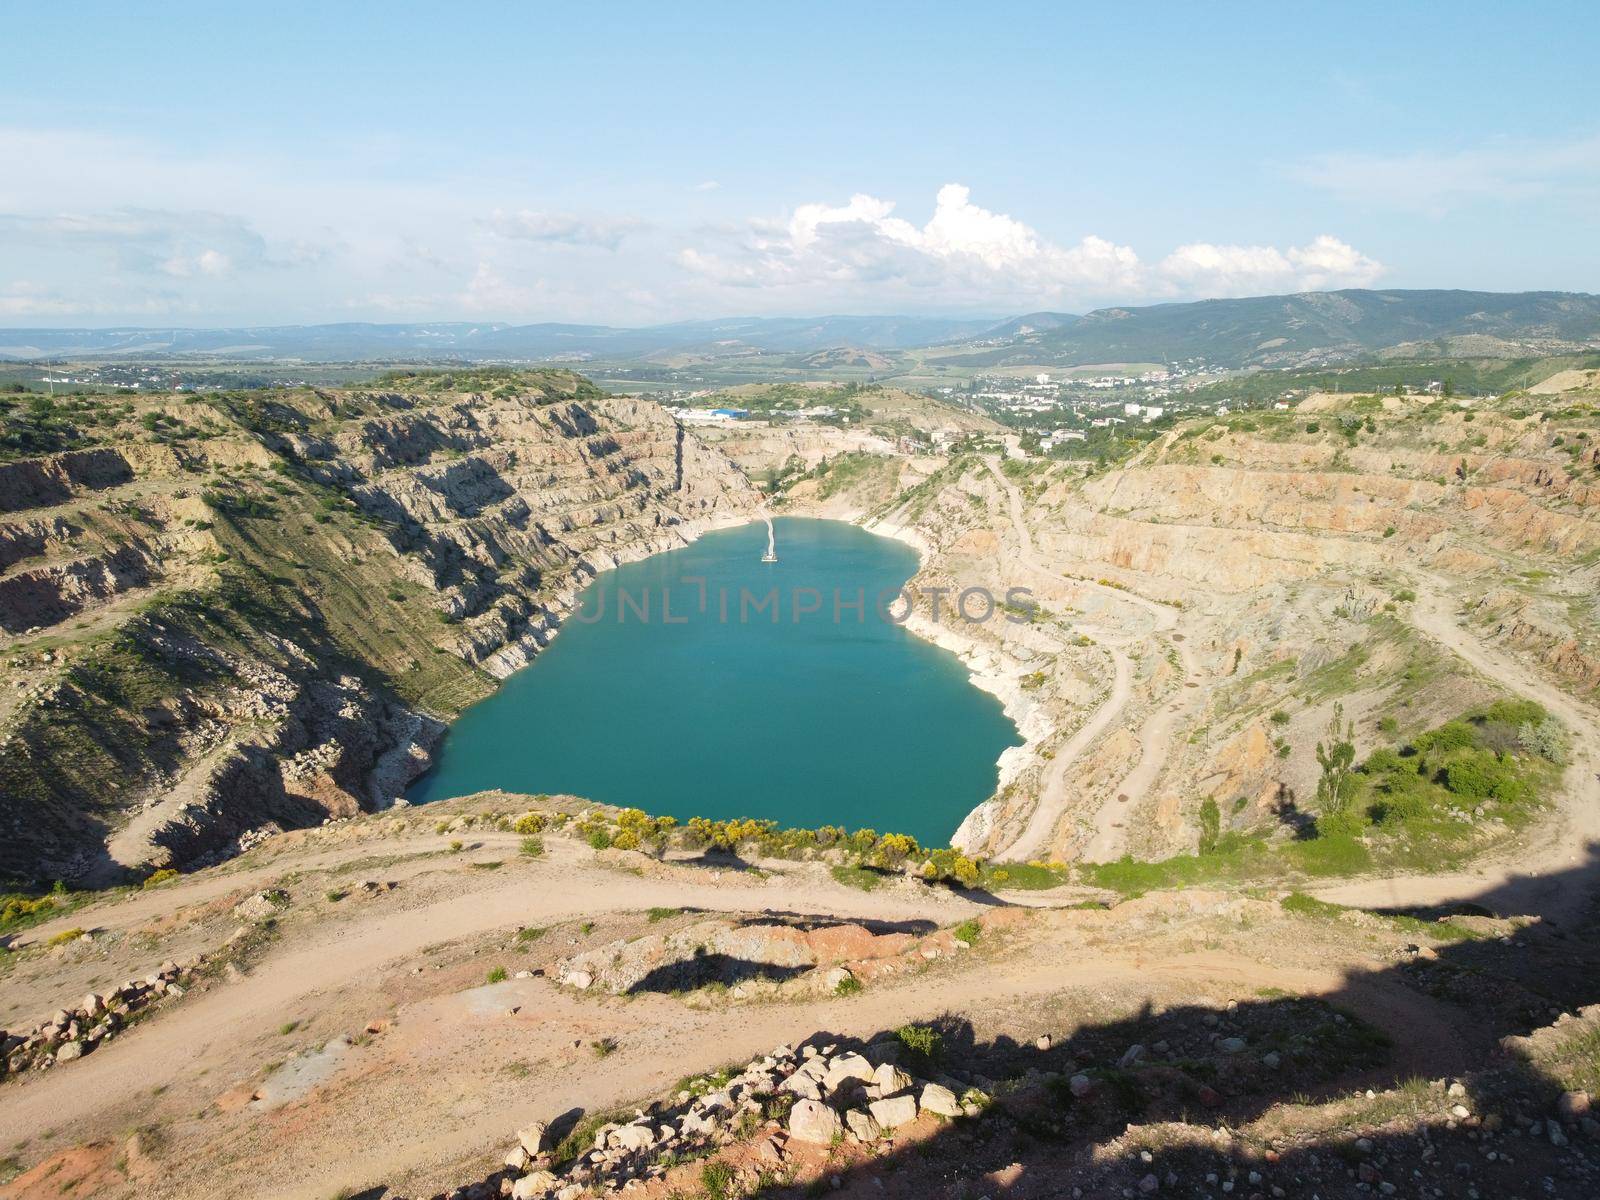 Flight over the turquoise surface of the lake in the center of the quarry. Industrial of opencast mining quarry with flooded bottom. Small lake in the shape of a heart